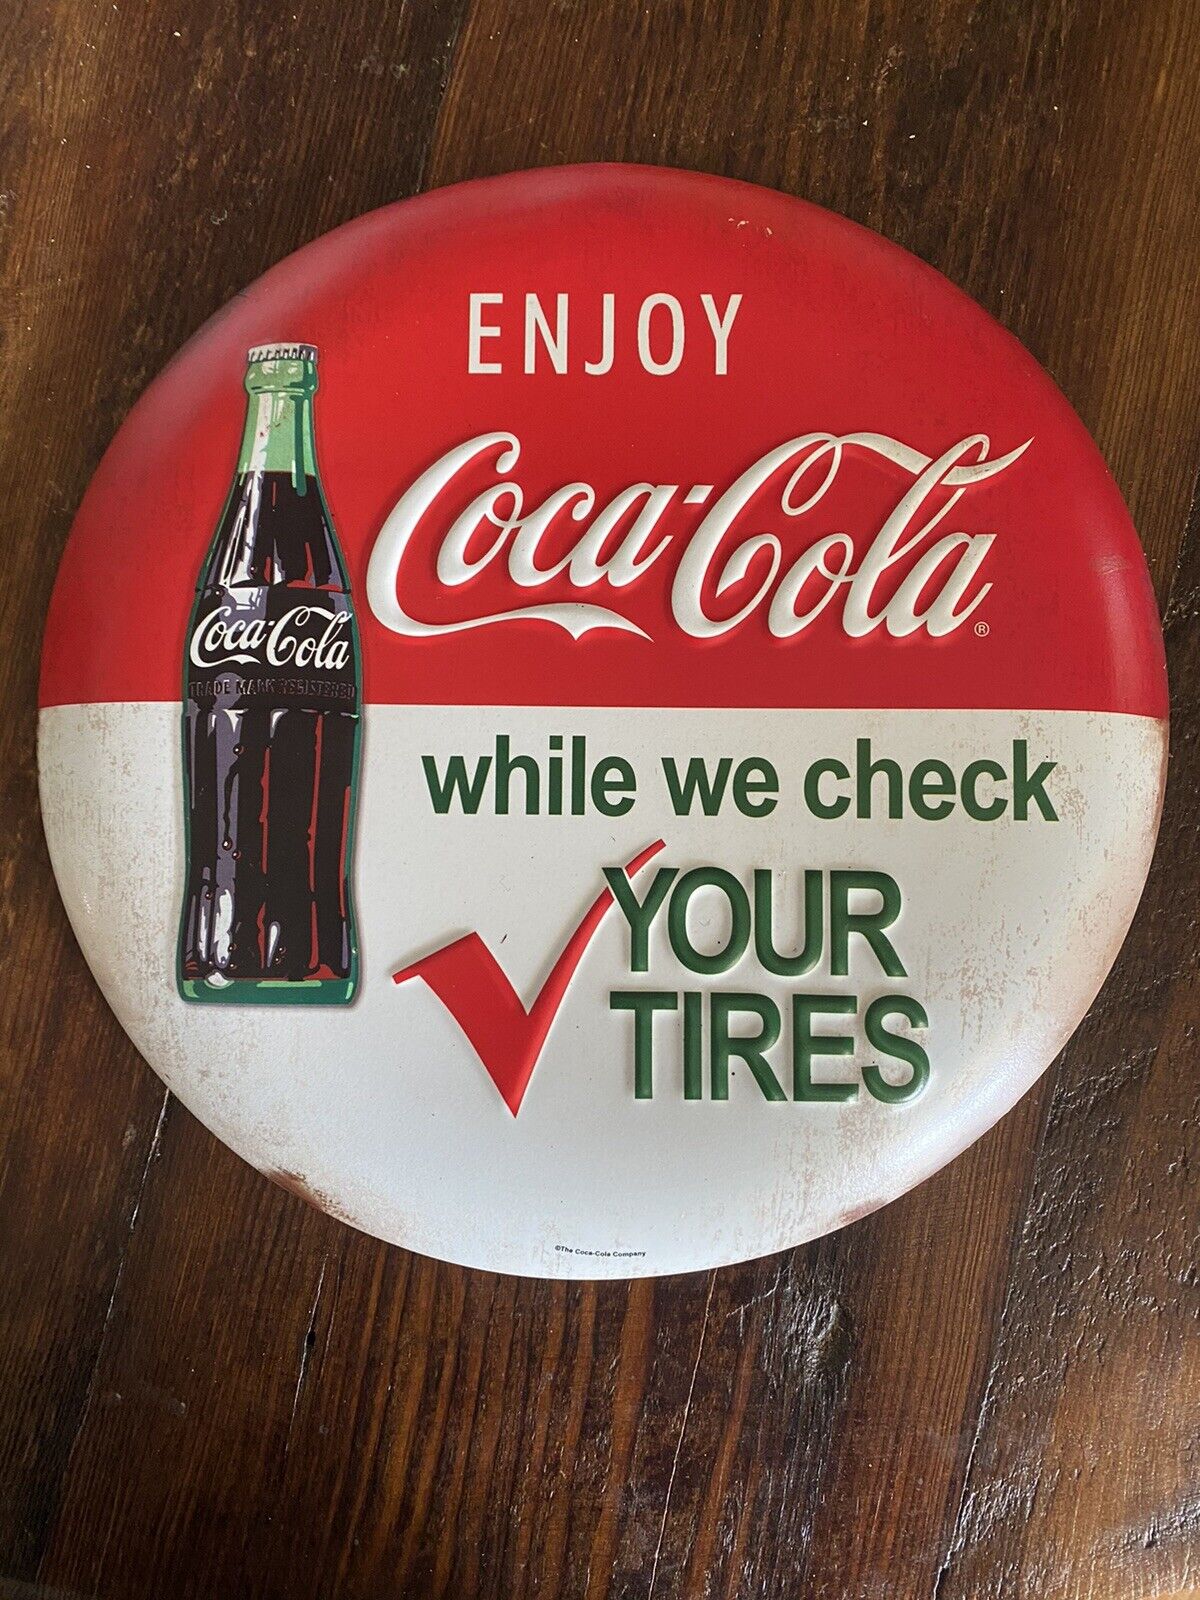 Enjoy Coco-Cola Round Metal Sign While We Check Your Tires Vintage Garage